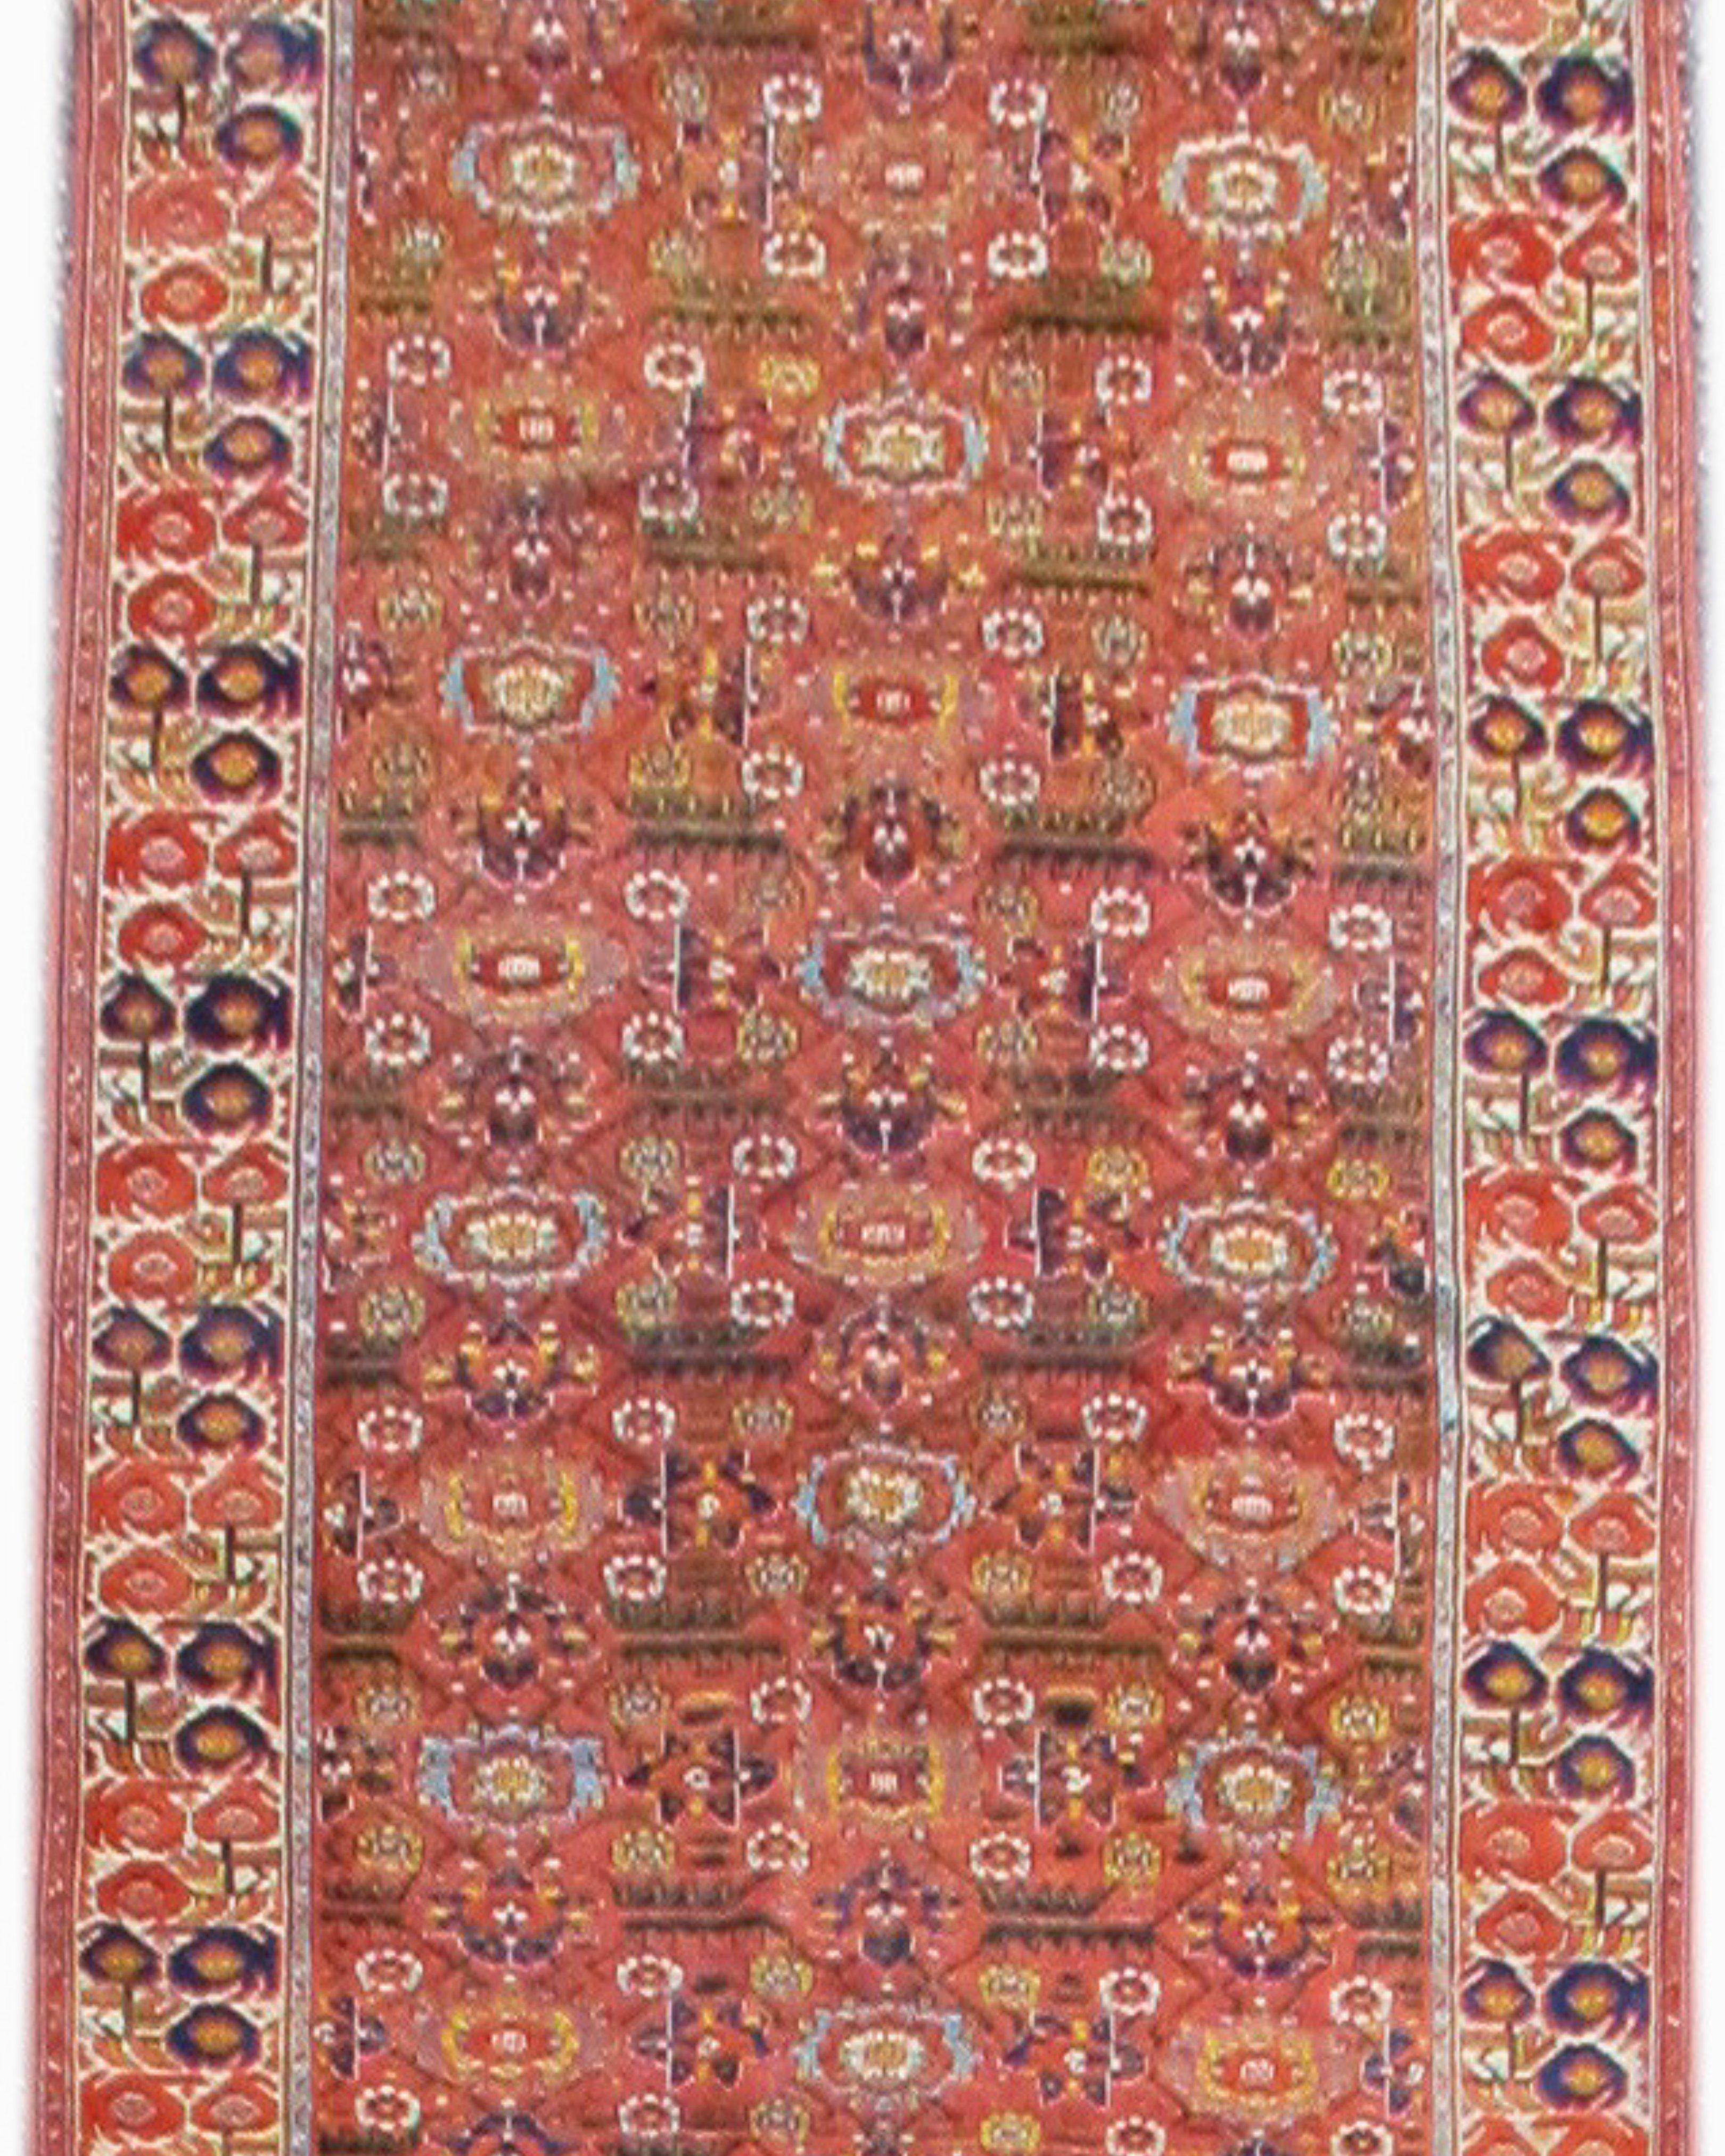 Hand-Knotted Antique Northwest Persian Long Rug, c. 1900 For Sale